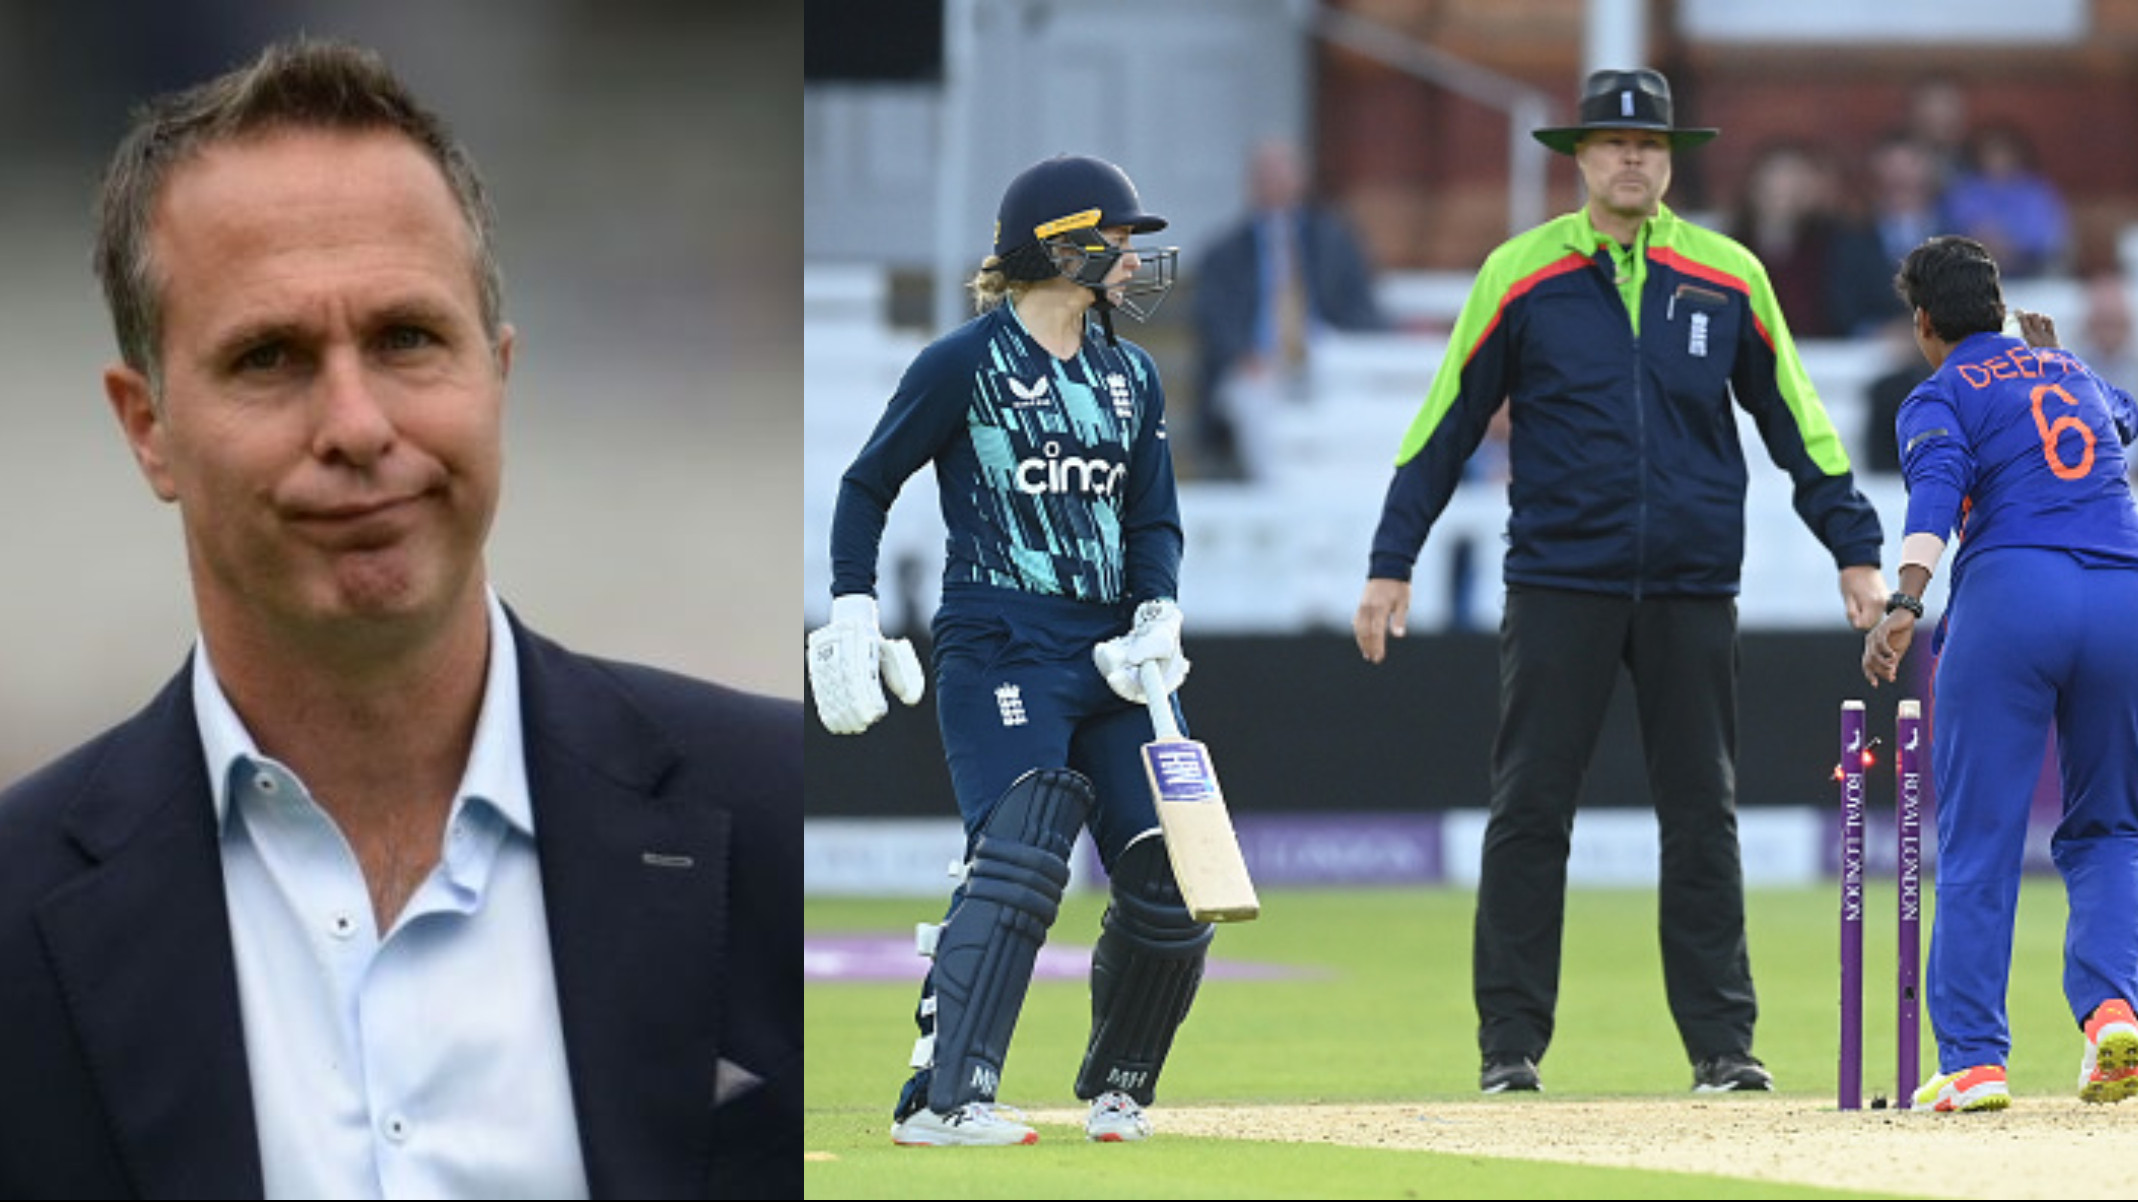 ENGW v INDW 2022: ‘No way to ever win a cricket match’- Michael Vaughan gets admonished for criticizing Deepti Sharma's run-out